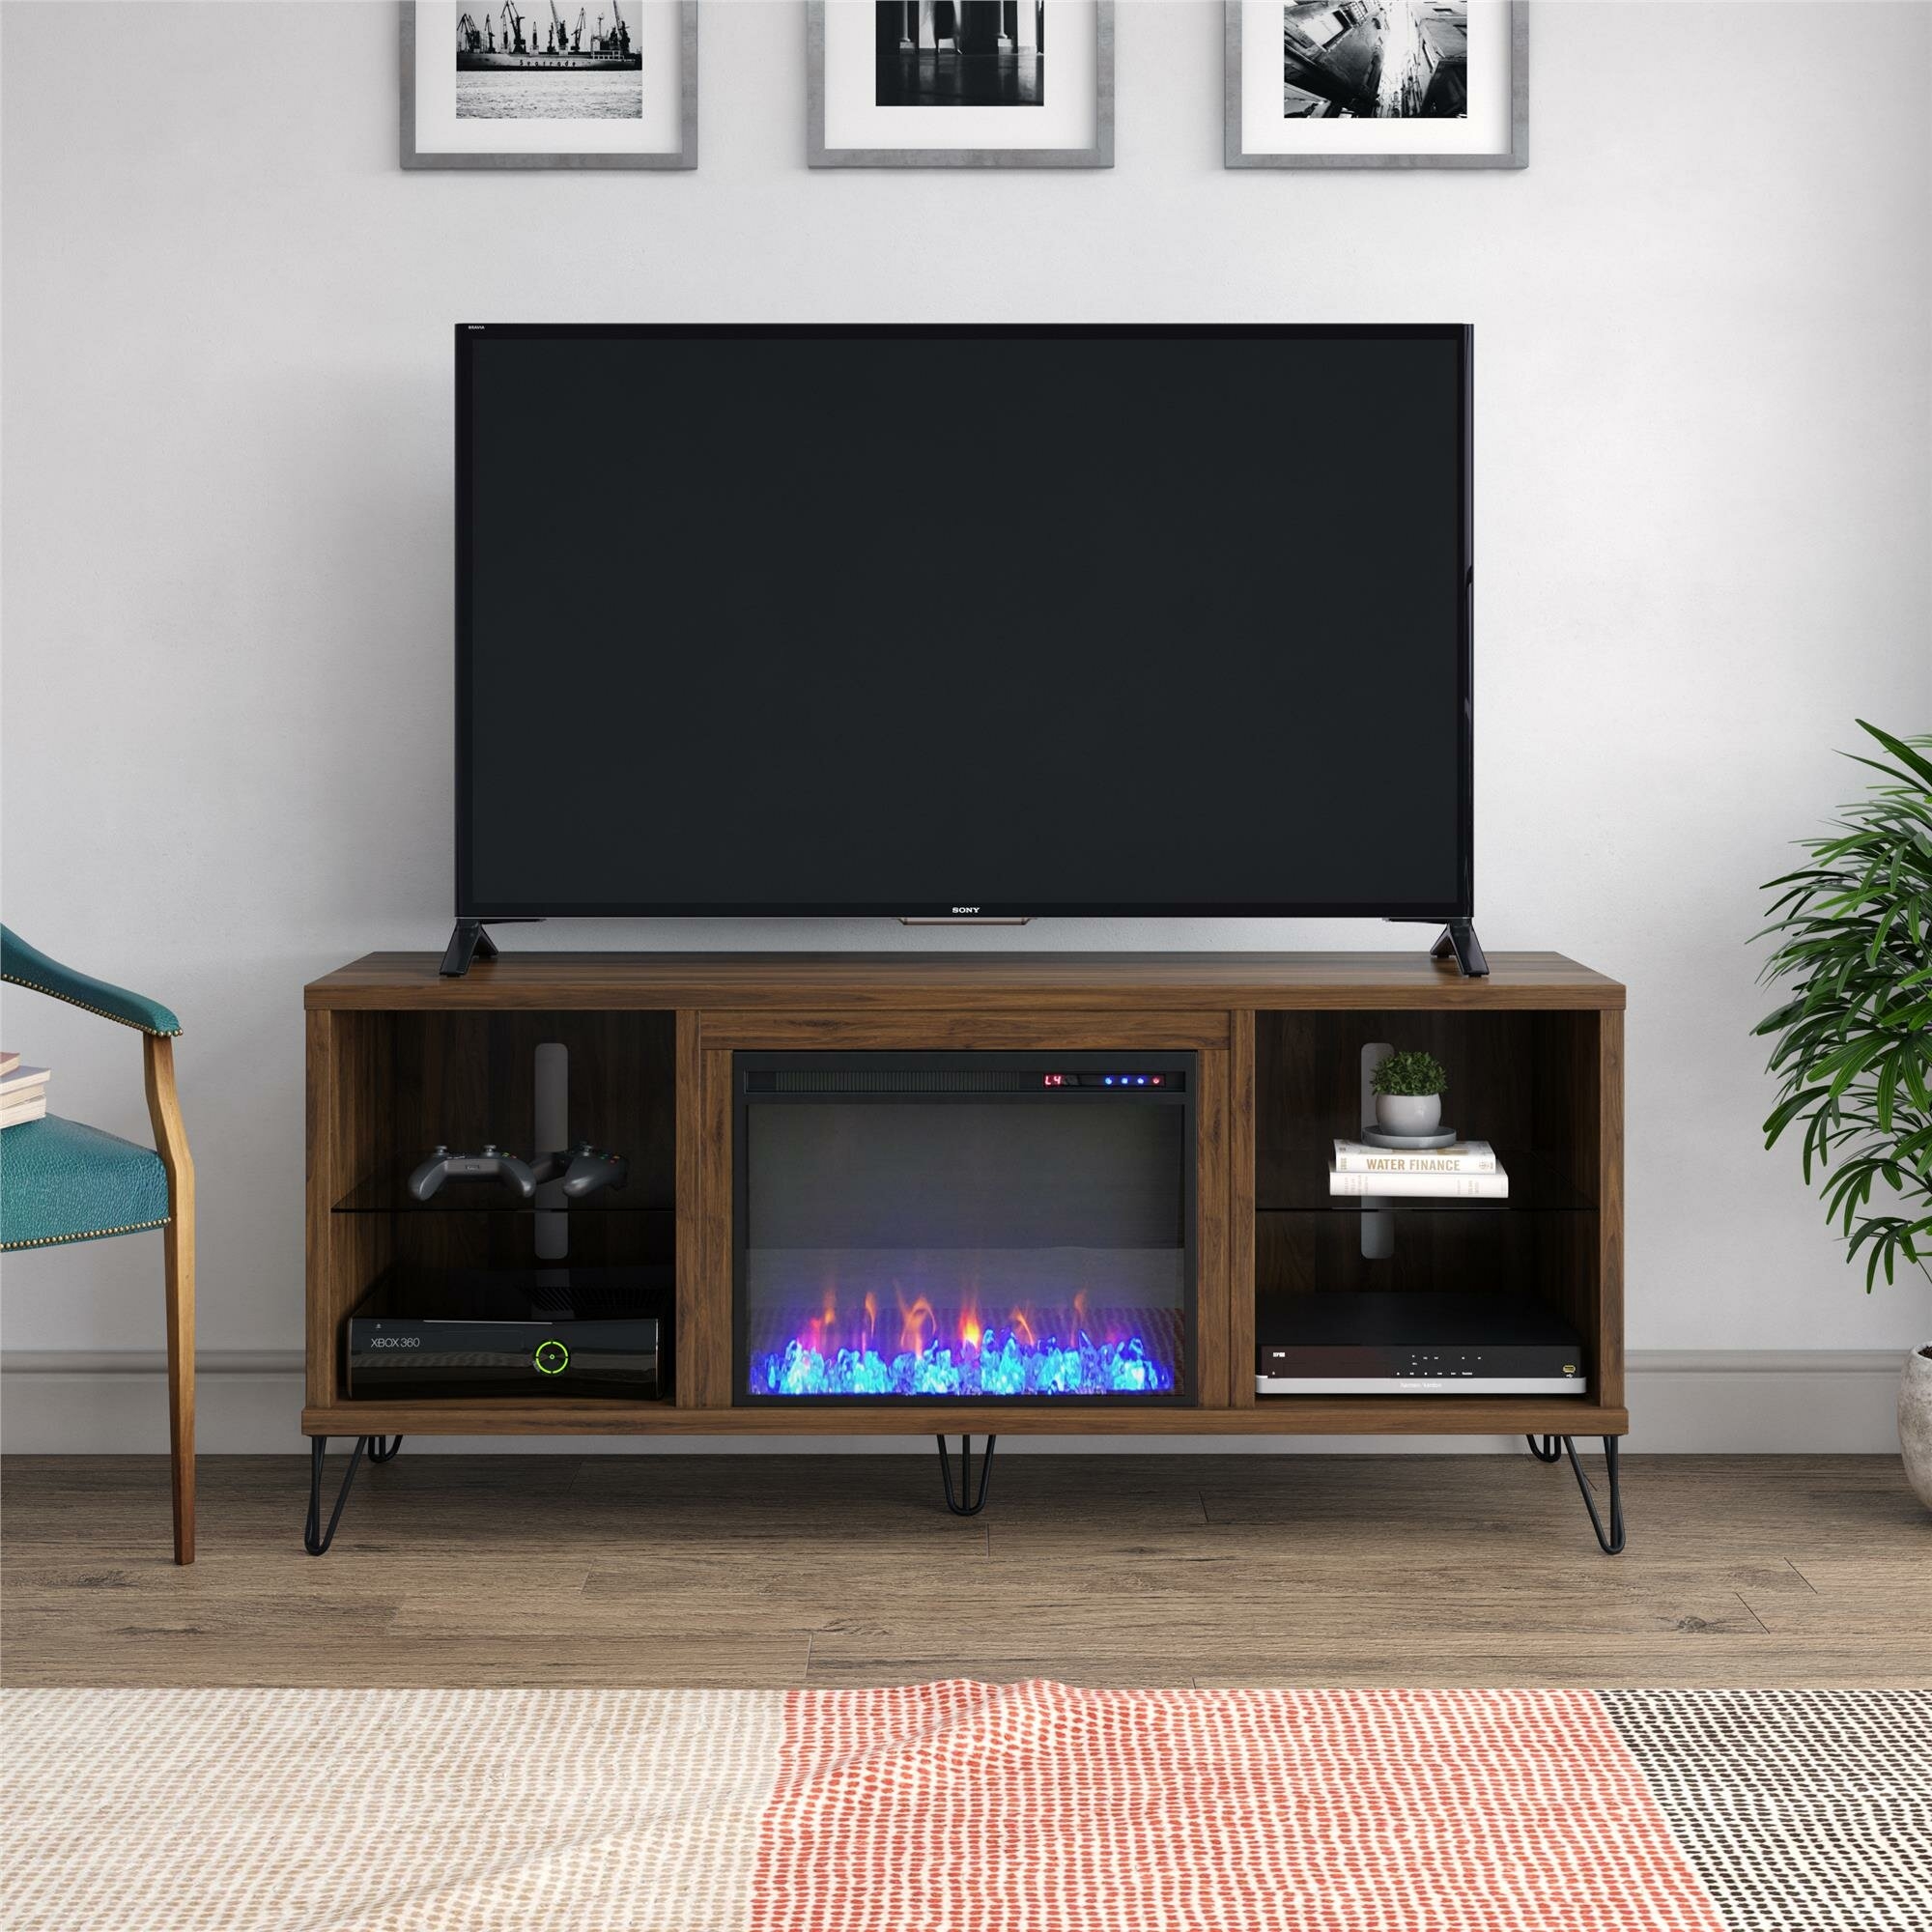 A Metal TV Console Will Blend Easily Into Any Decor